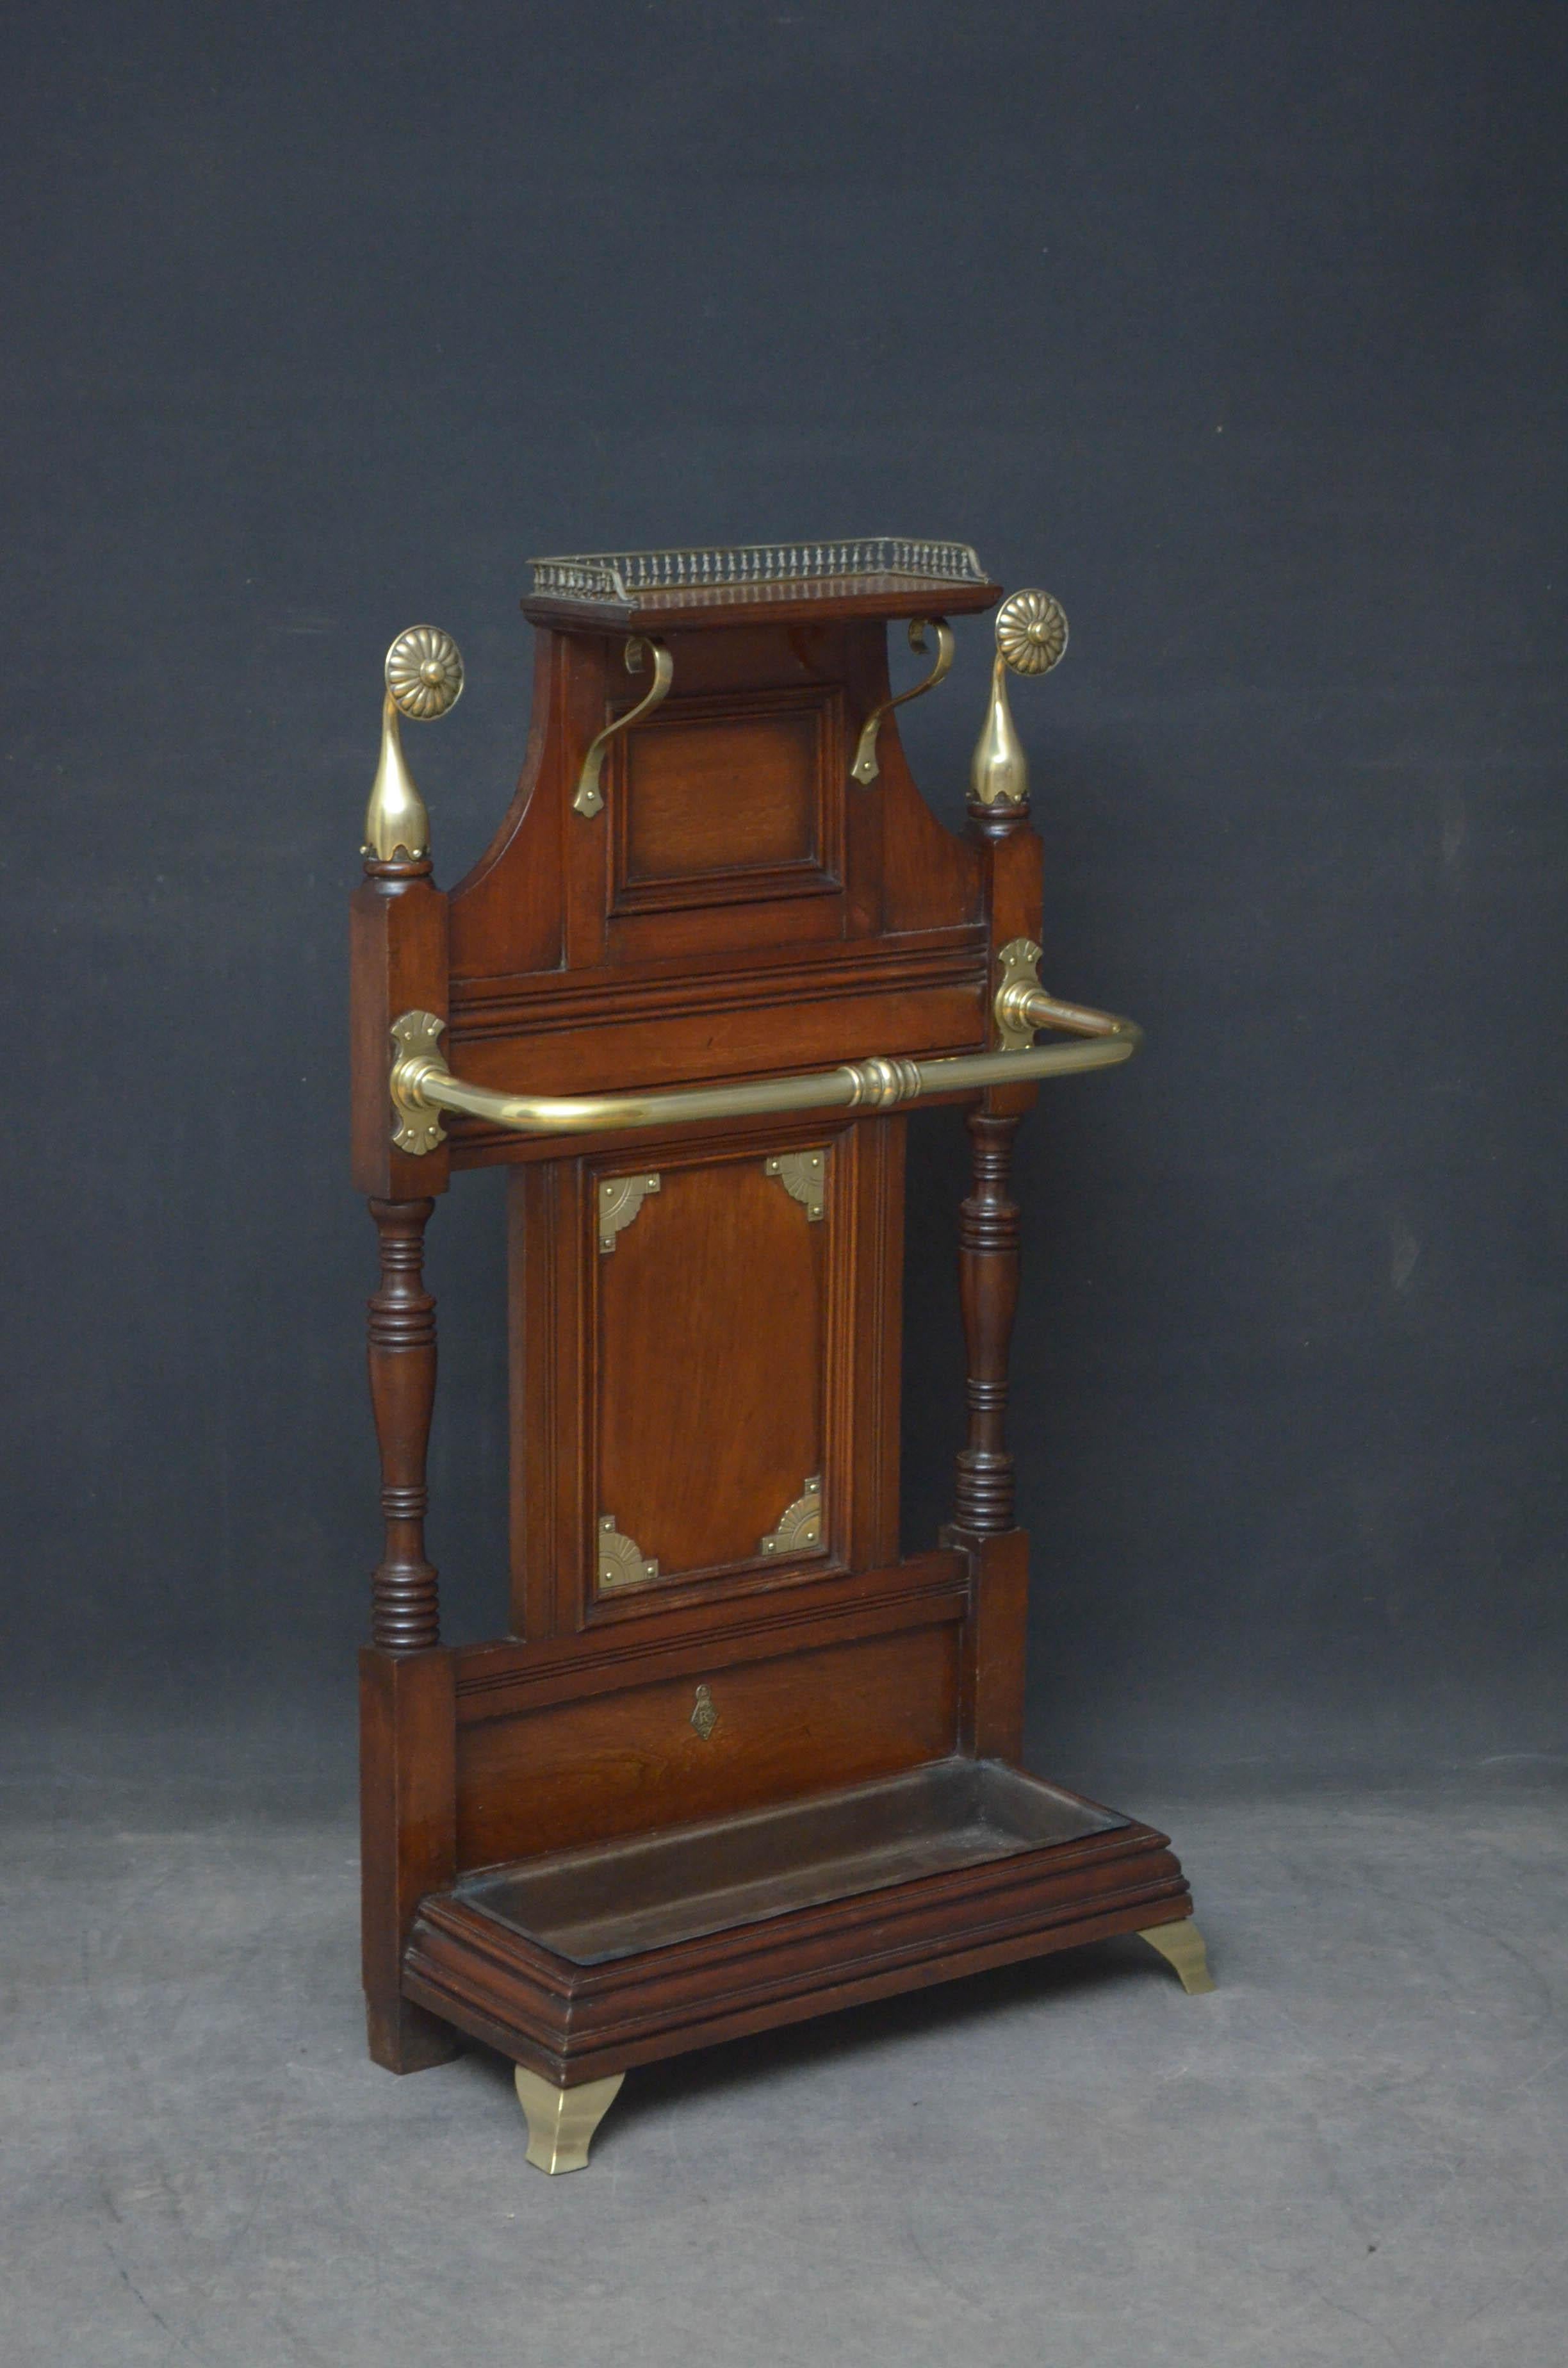 Sn4808 Stylish Victorian umbrella stand in the manner of James Schoolbred, having brass gallery to the shelf over moulded recessed panels and turned columns all fitted with decorative brasses and original drip tray, all in excellent original